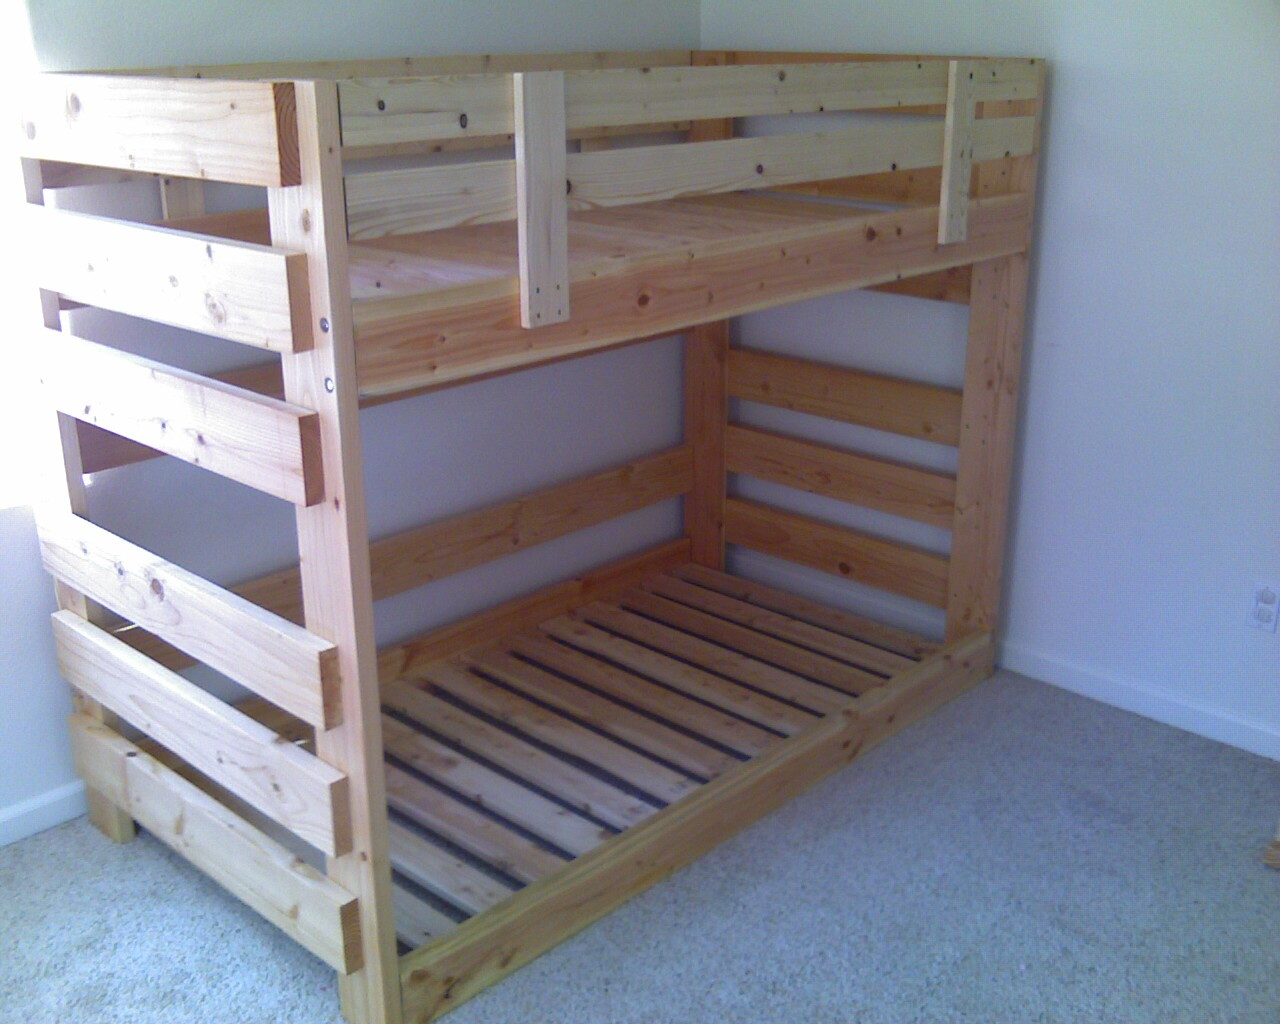 Todd S Custom Bunk Beds The Wood, How Much Does It Cost To Build Custom Bunk Beds